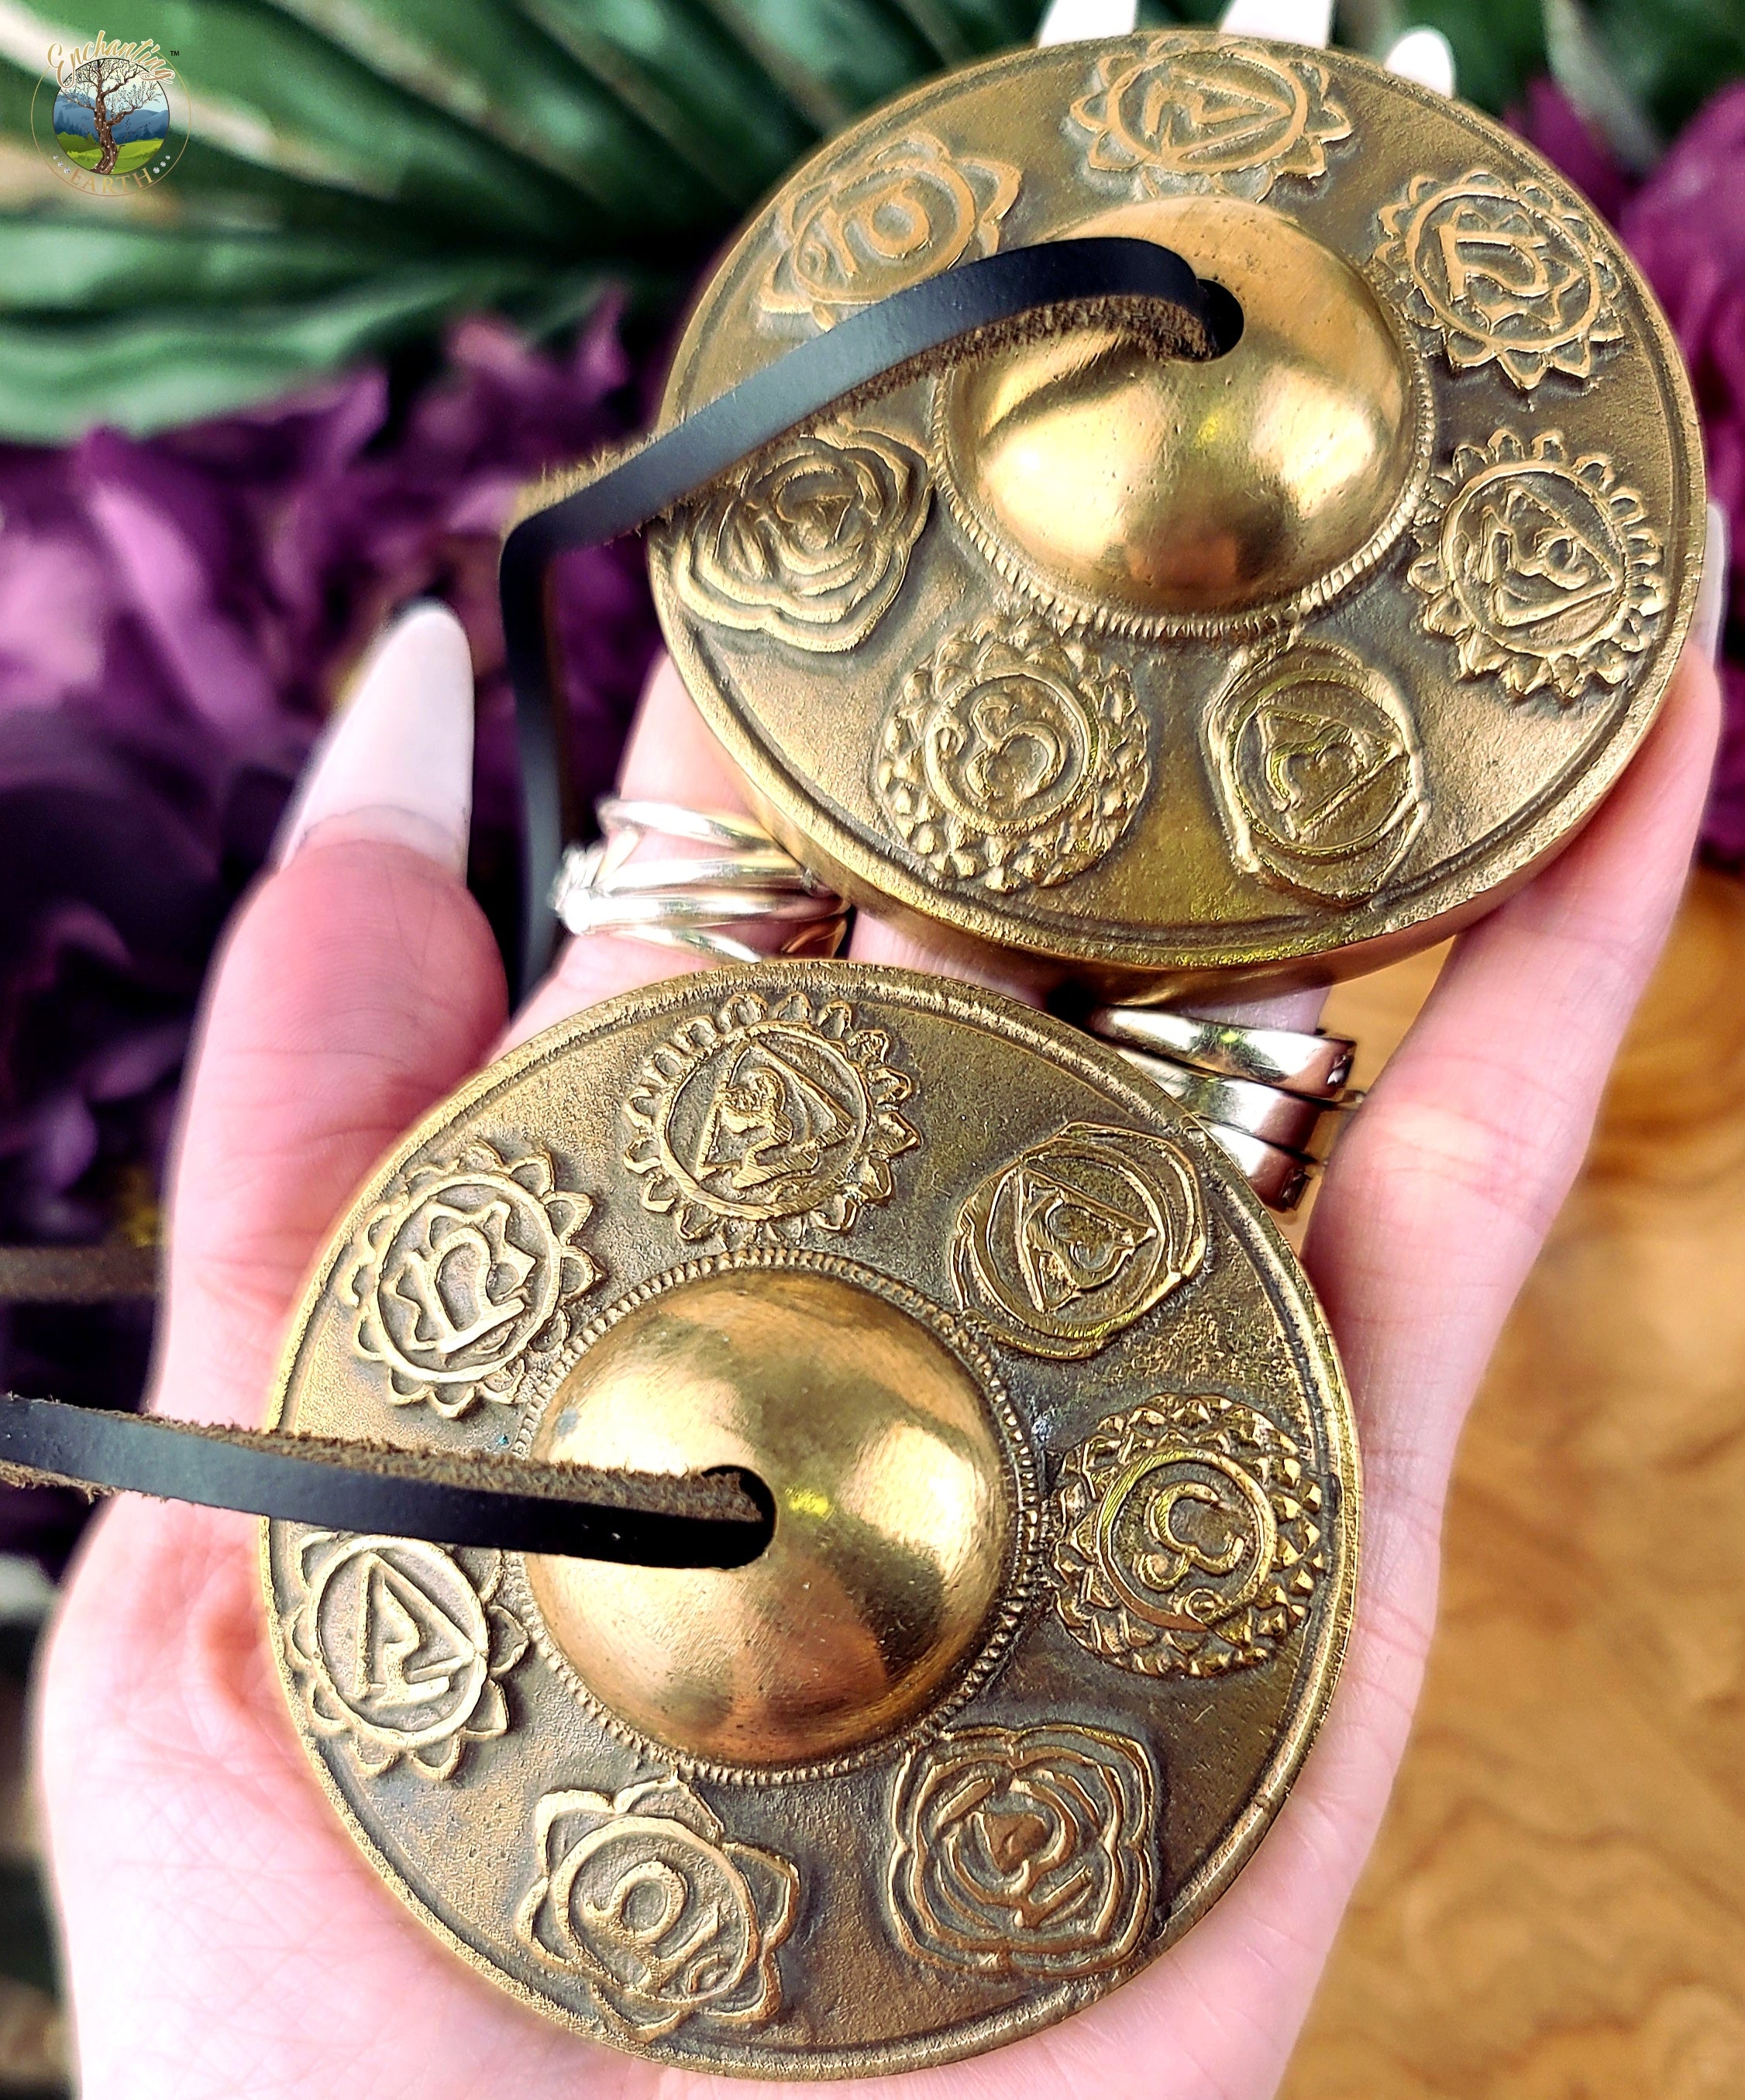 Tingsha Chakra Bells for Clearing Negativity and Sound Healing